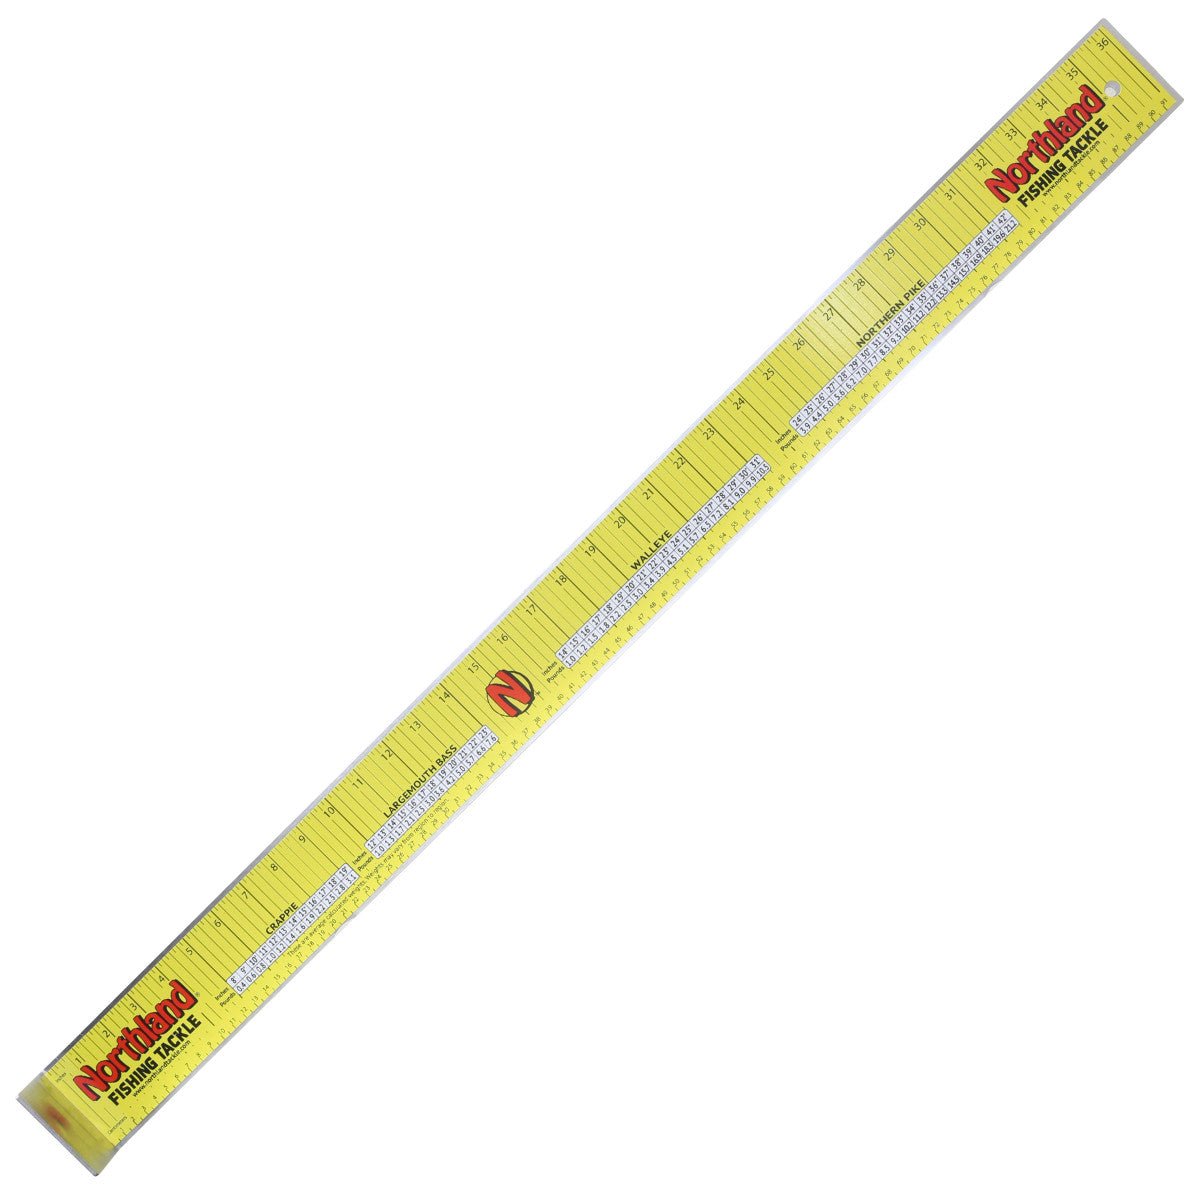 Northland Ruler Scale Board - Hamilton Bait and Tackle